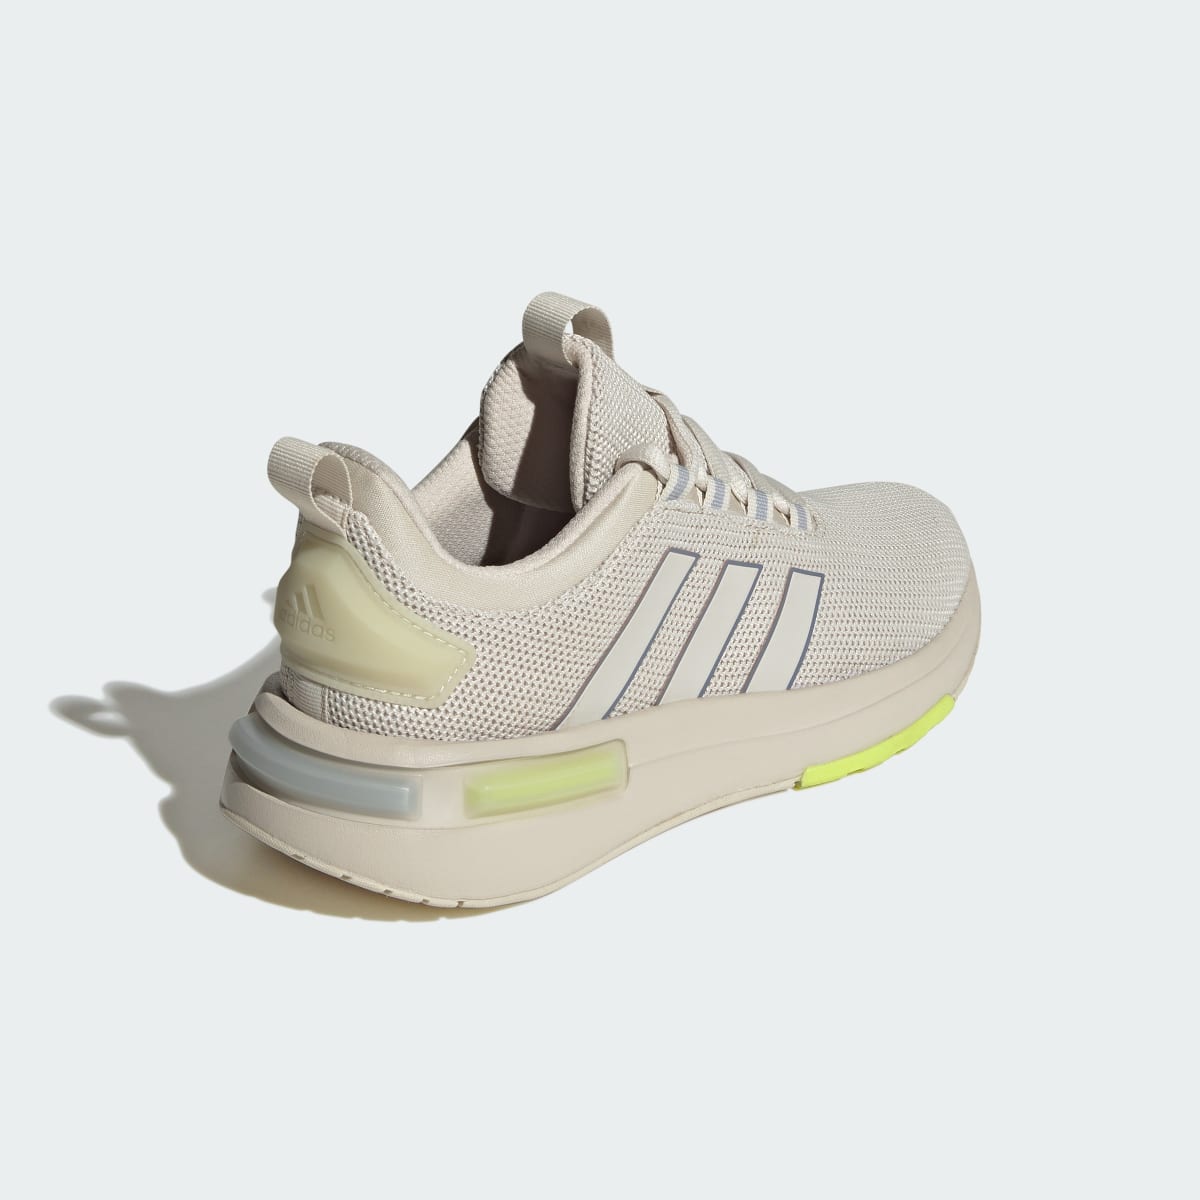 Adidas Racer TR23 Shoes. 6